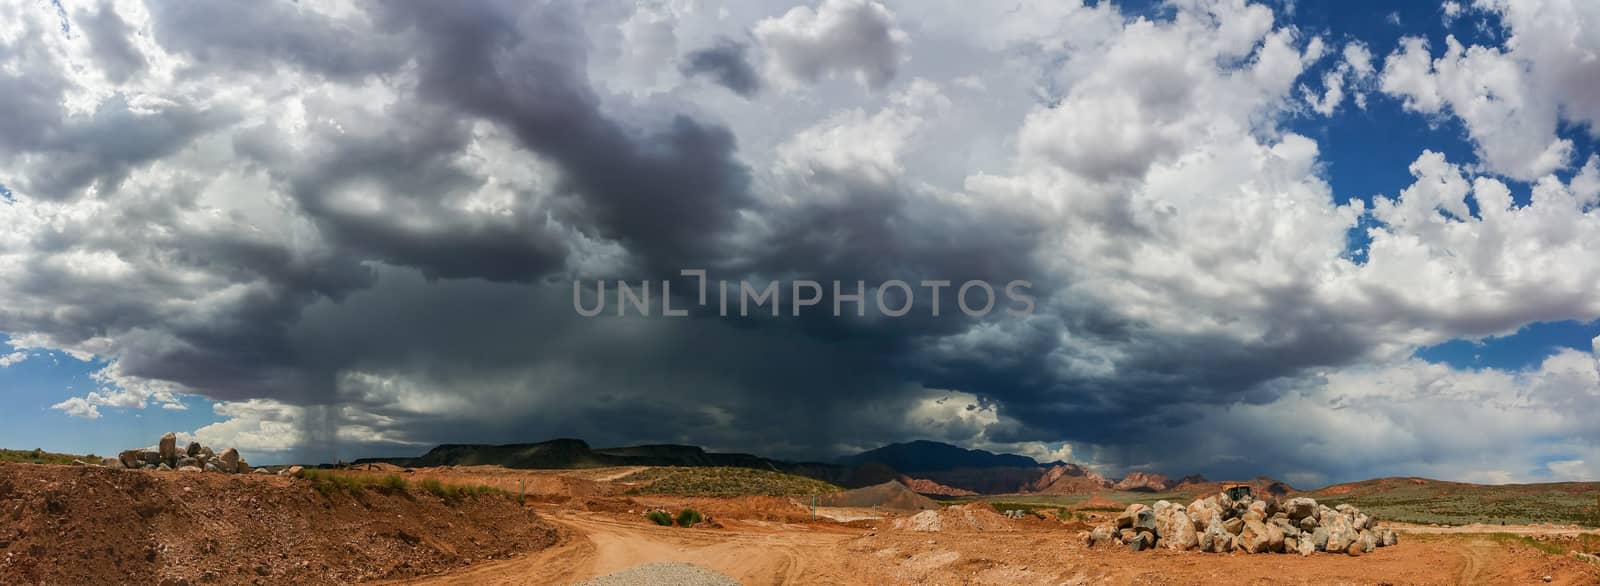 Ominous Stormy Sky and Cumulus Clouds with Rain Pano in the Desert. by Feverpitched